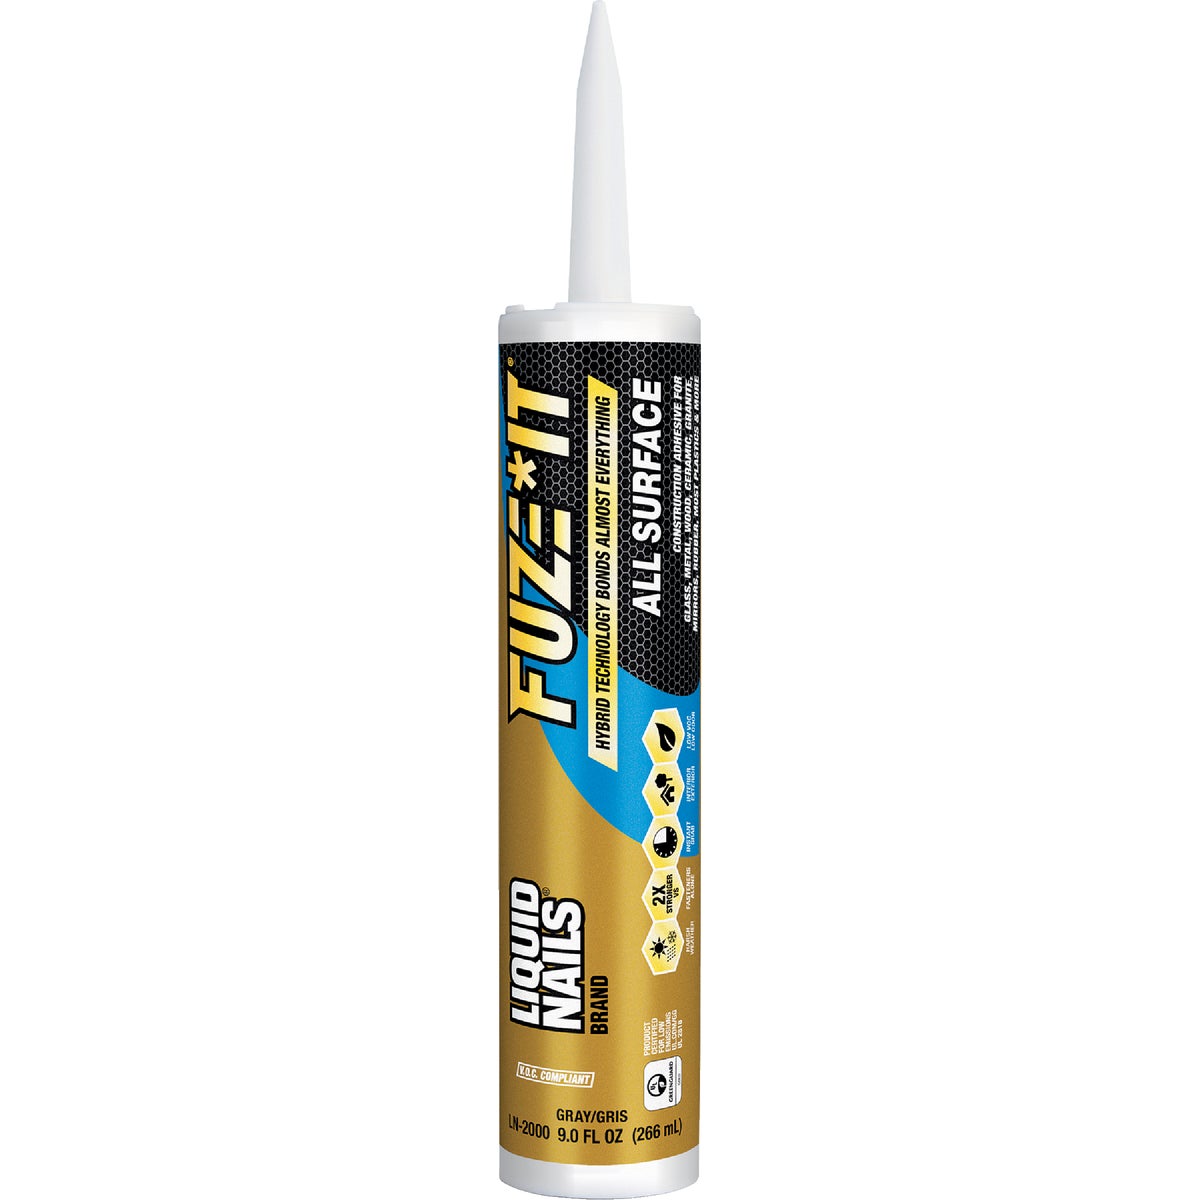 Item 771146, Liquid Nails Fuze-It all surface, VOC construction adhesive formulated with